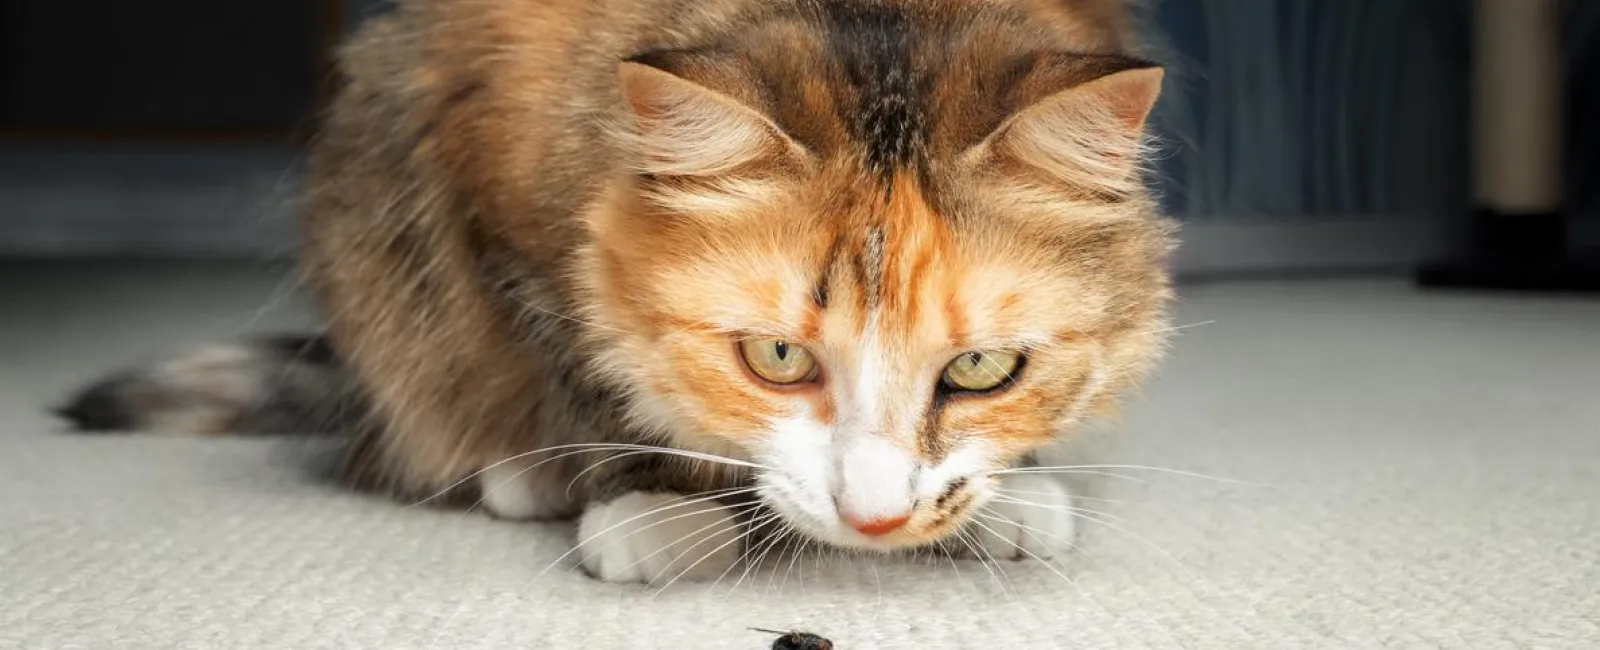 a cat hunting a fly on a carpet